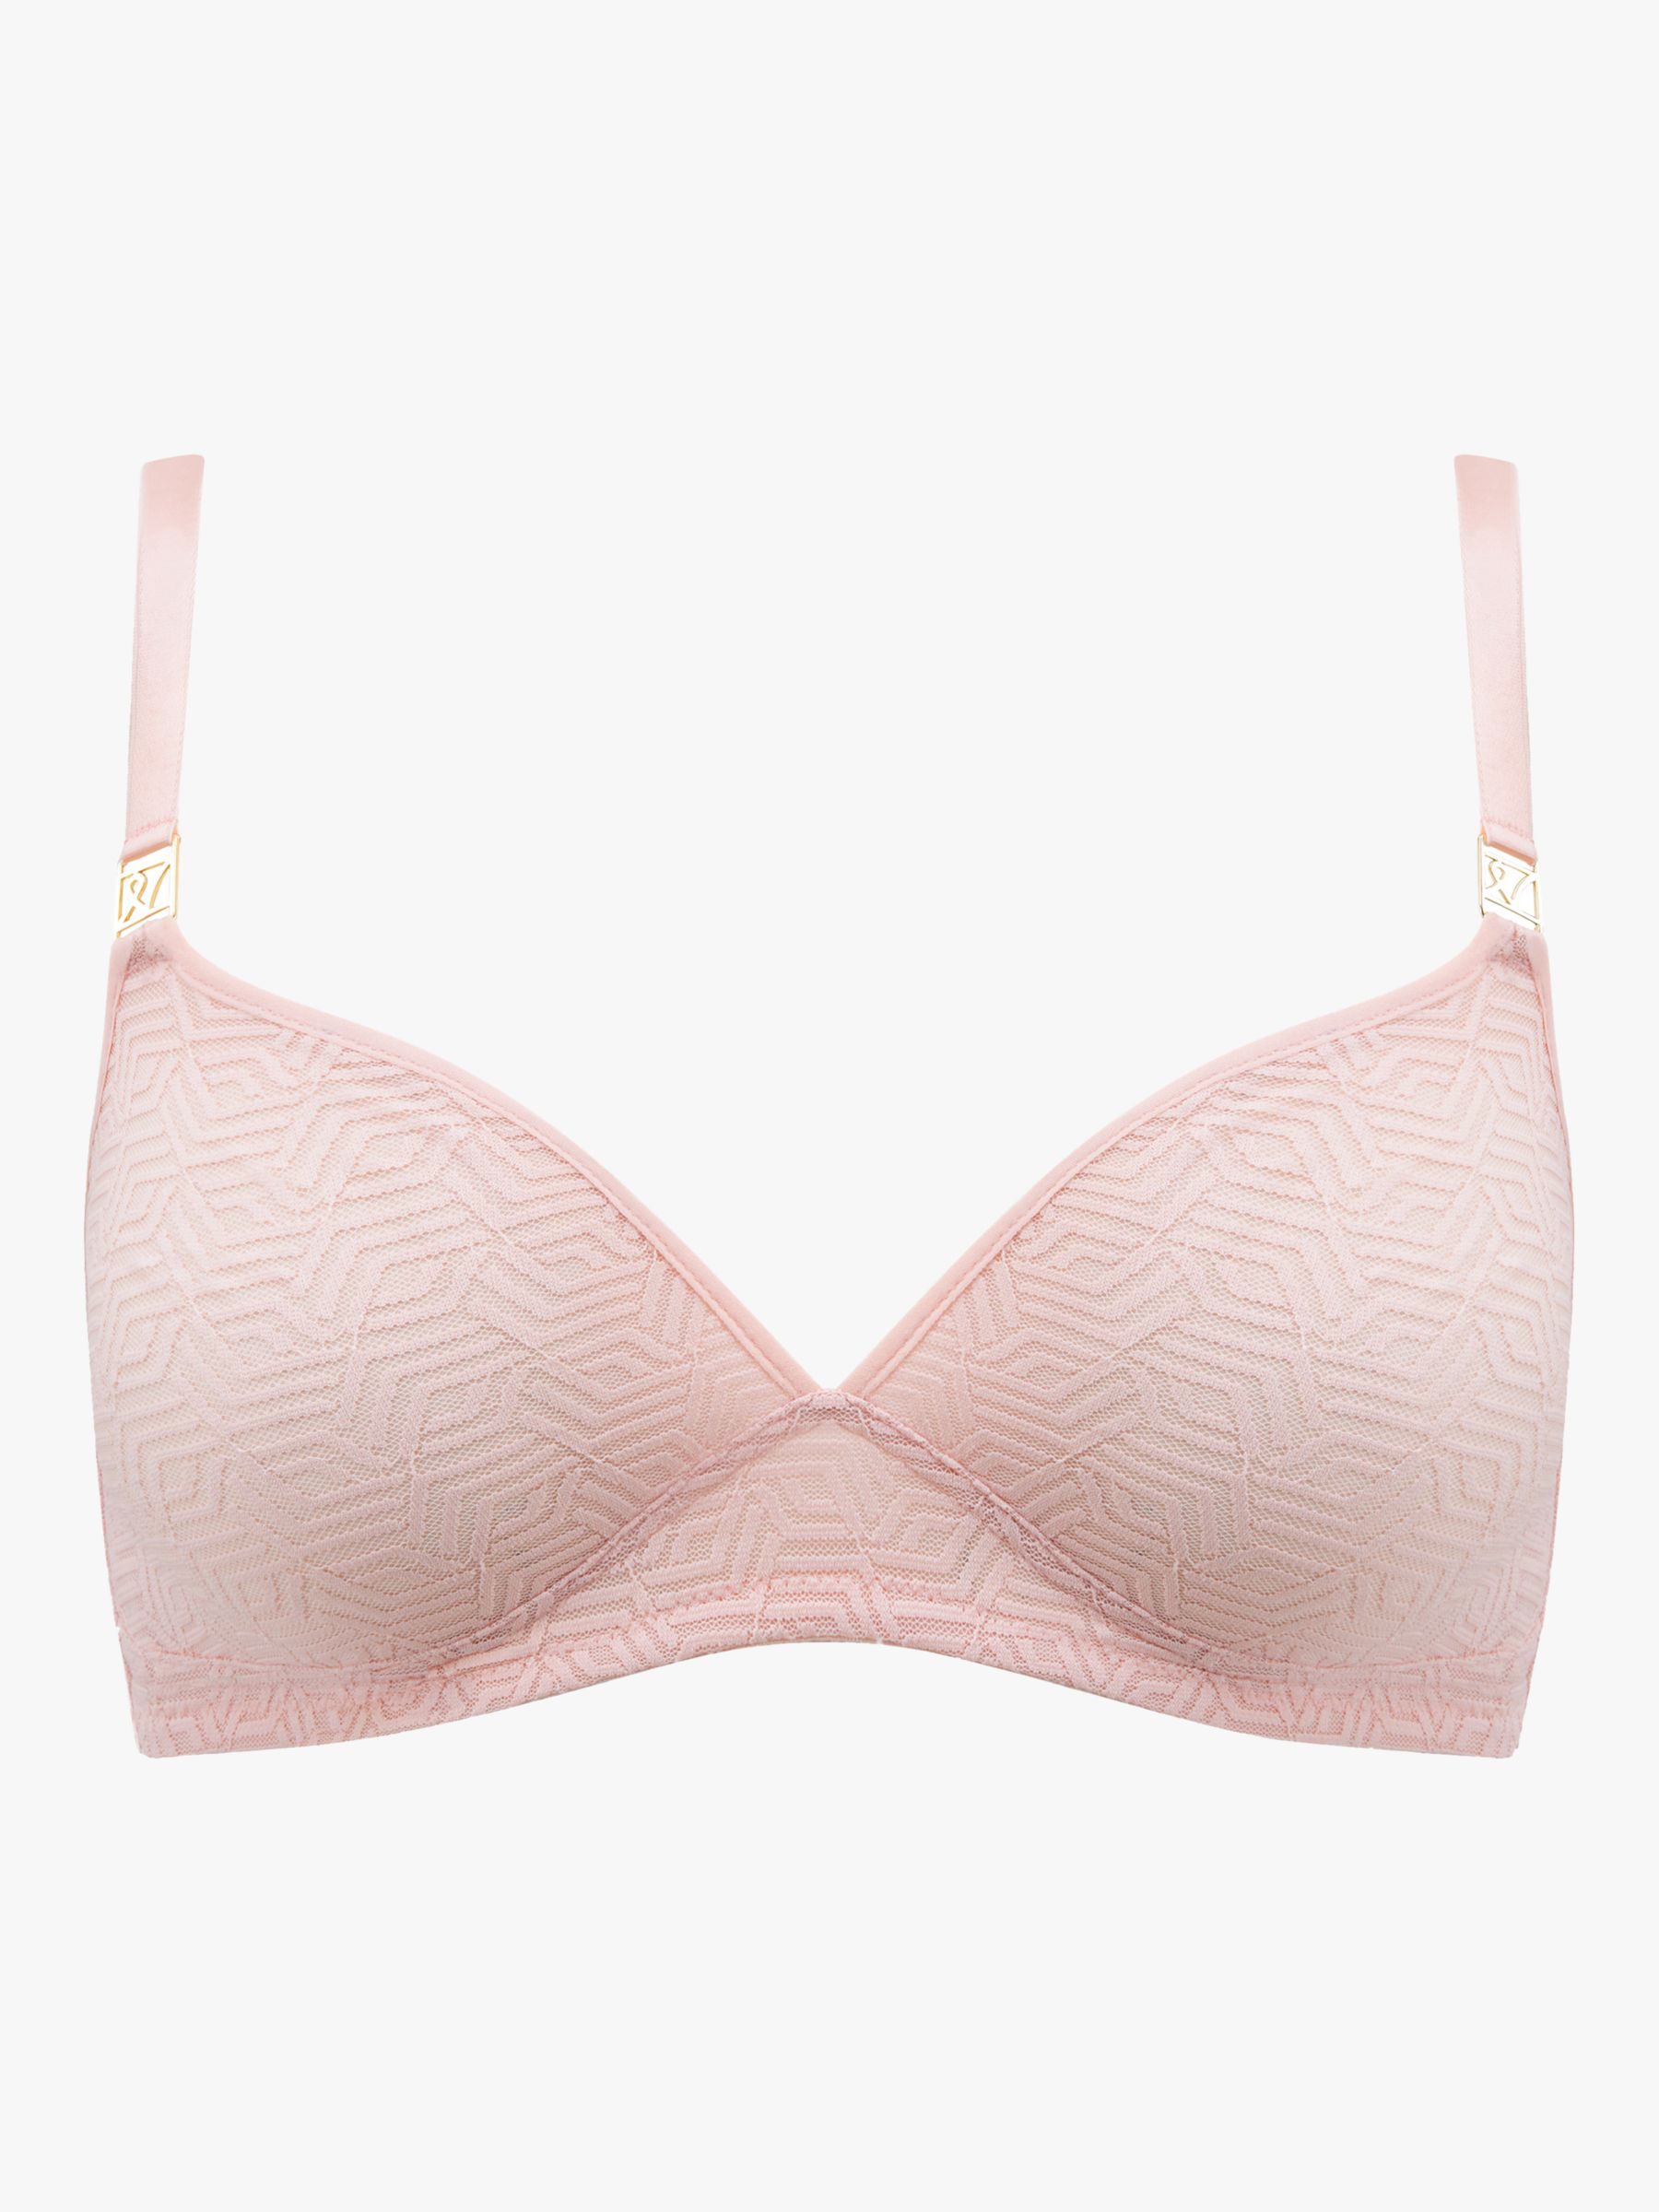 Nudea Non-Wired Bralette, Blush Pink at John Lewis & Partners